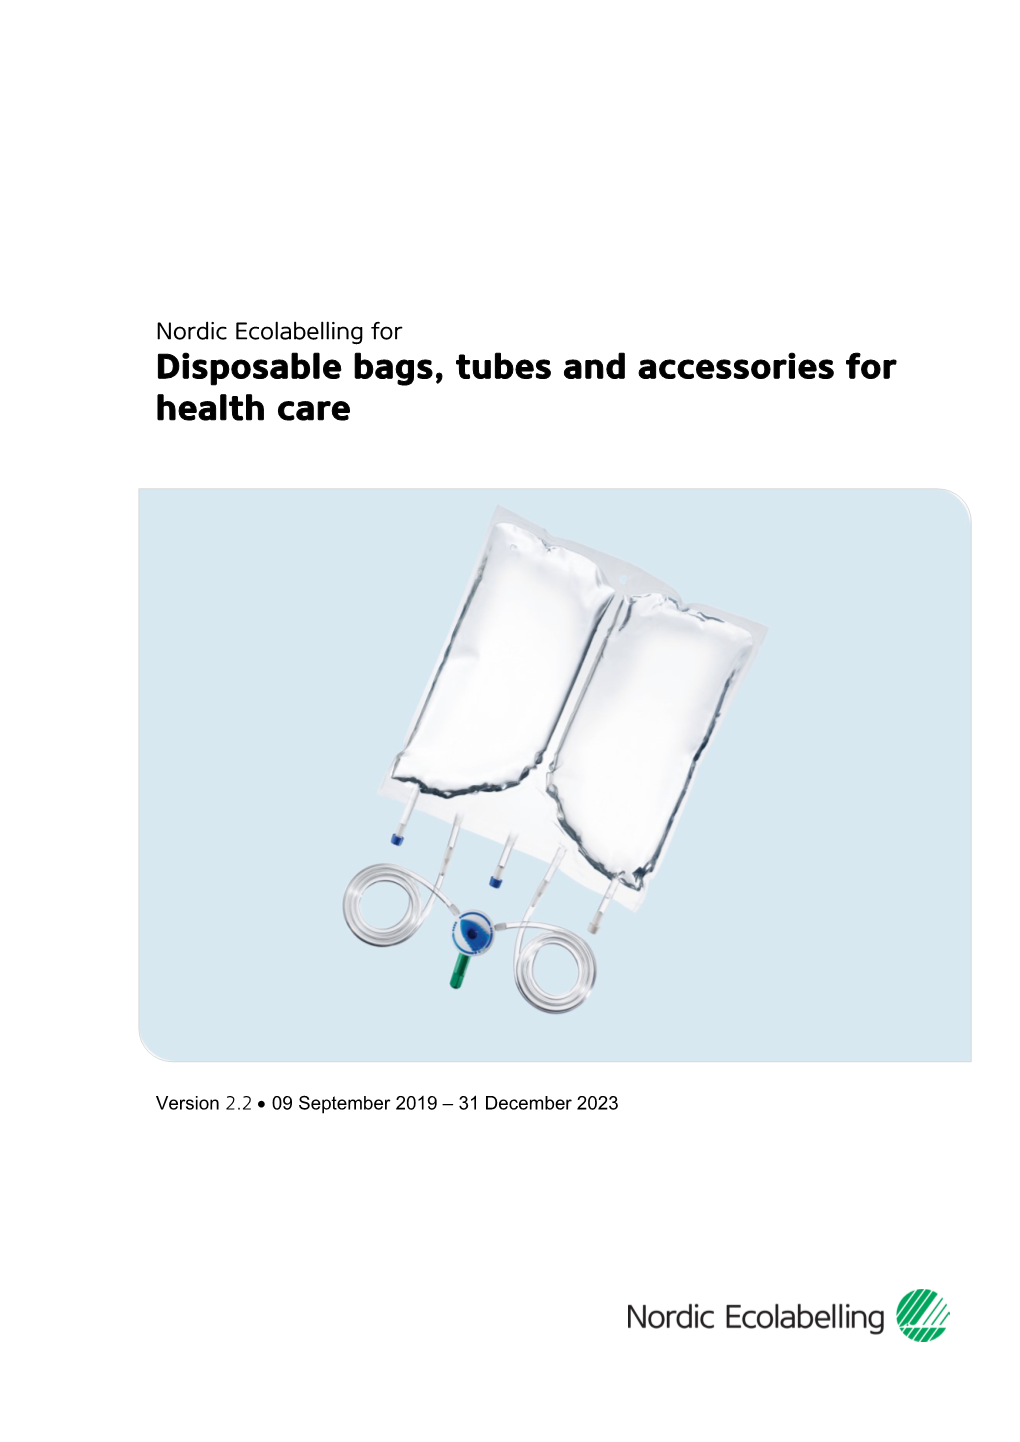 Disposable Bags, Tubes and Accessories for Health Care